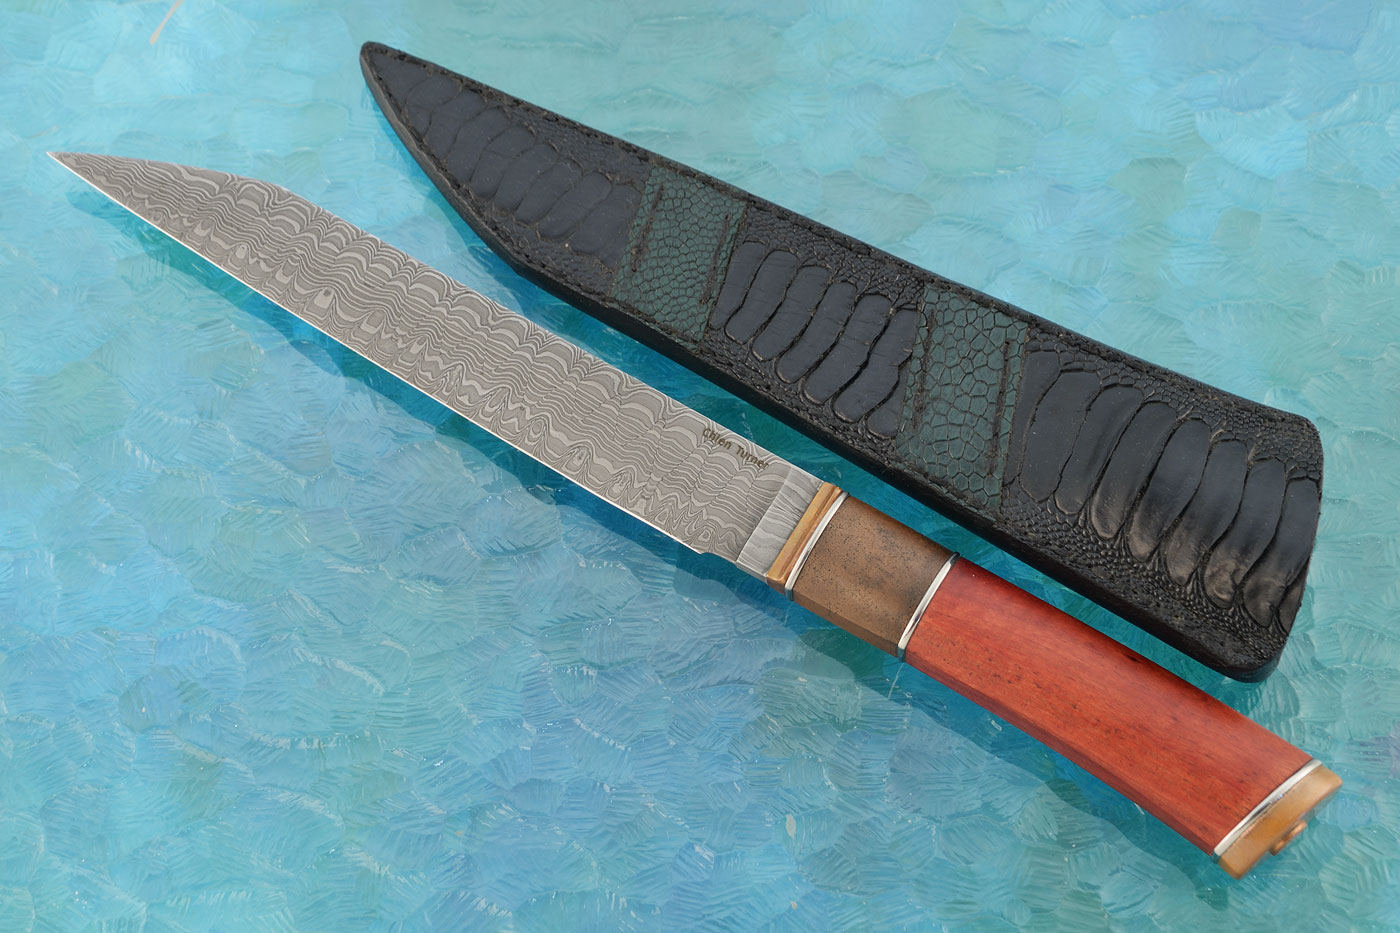 Damascus Seax with Red Ivory Wood and Antiqued Bronze<br><i>Best Novice Forged</i> - Durban Easter Knife Show, 2022